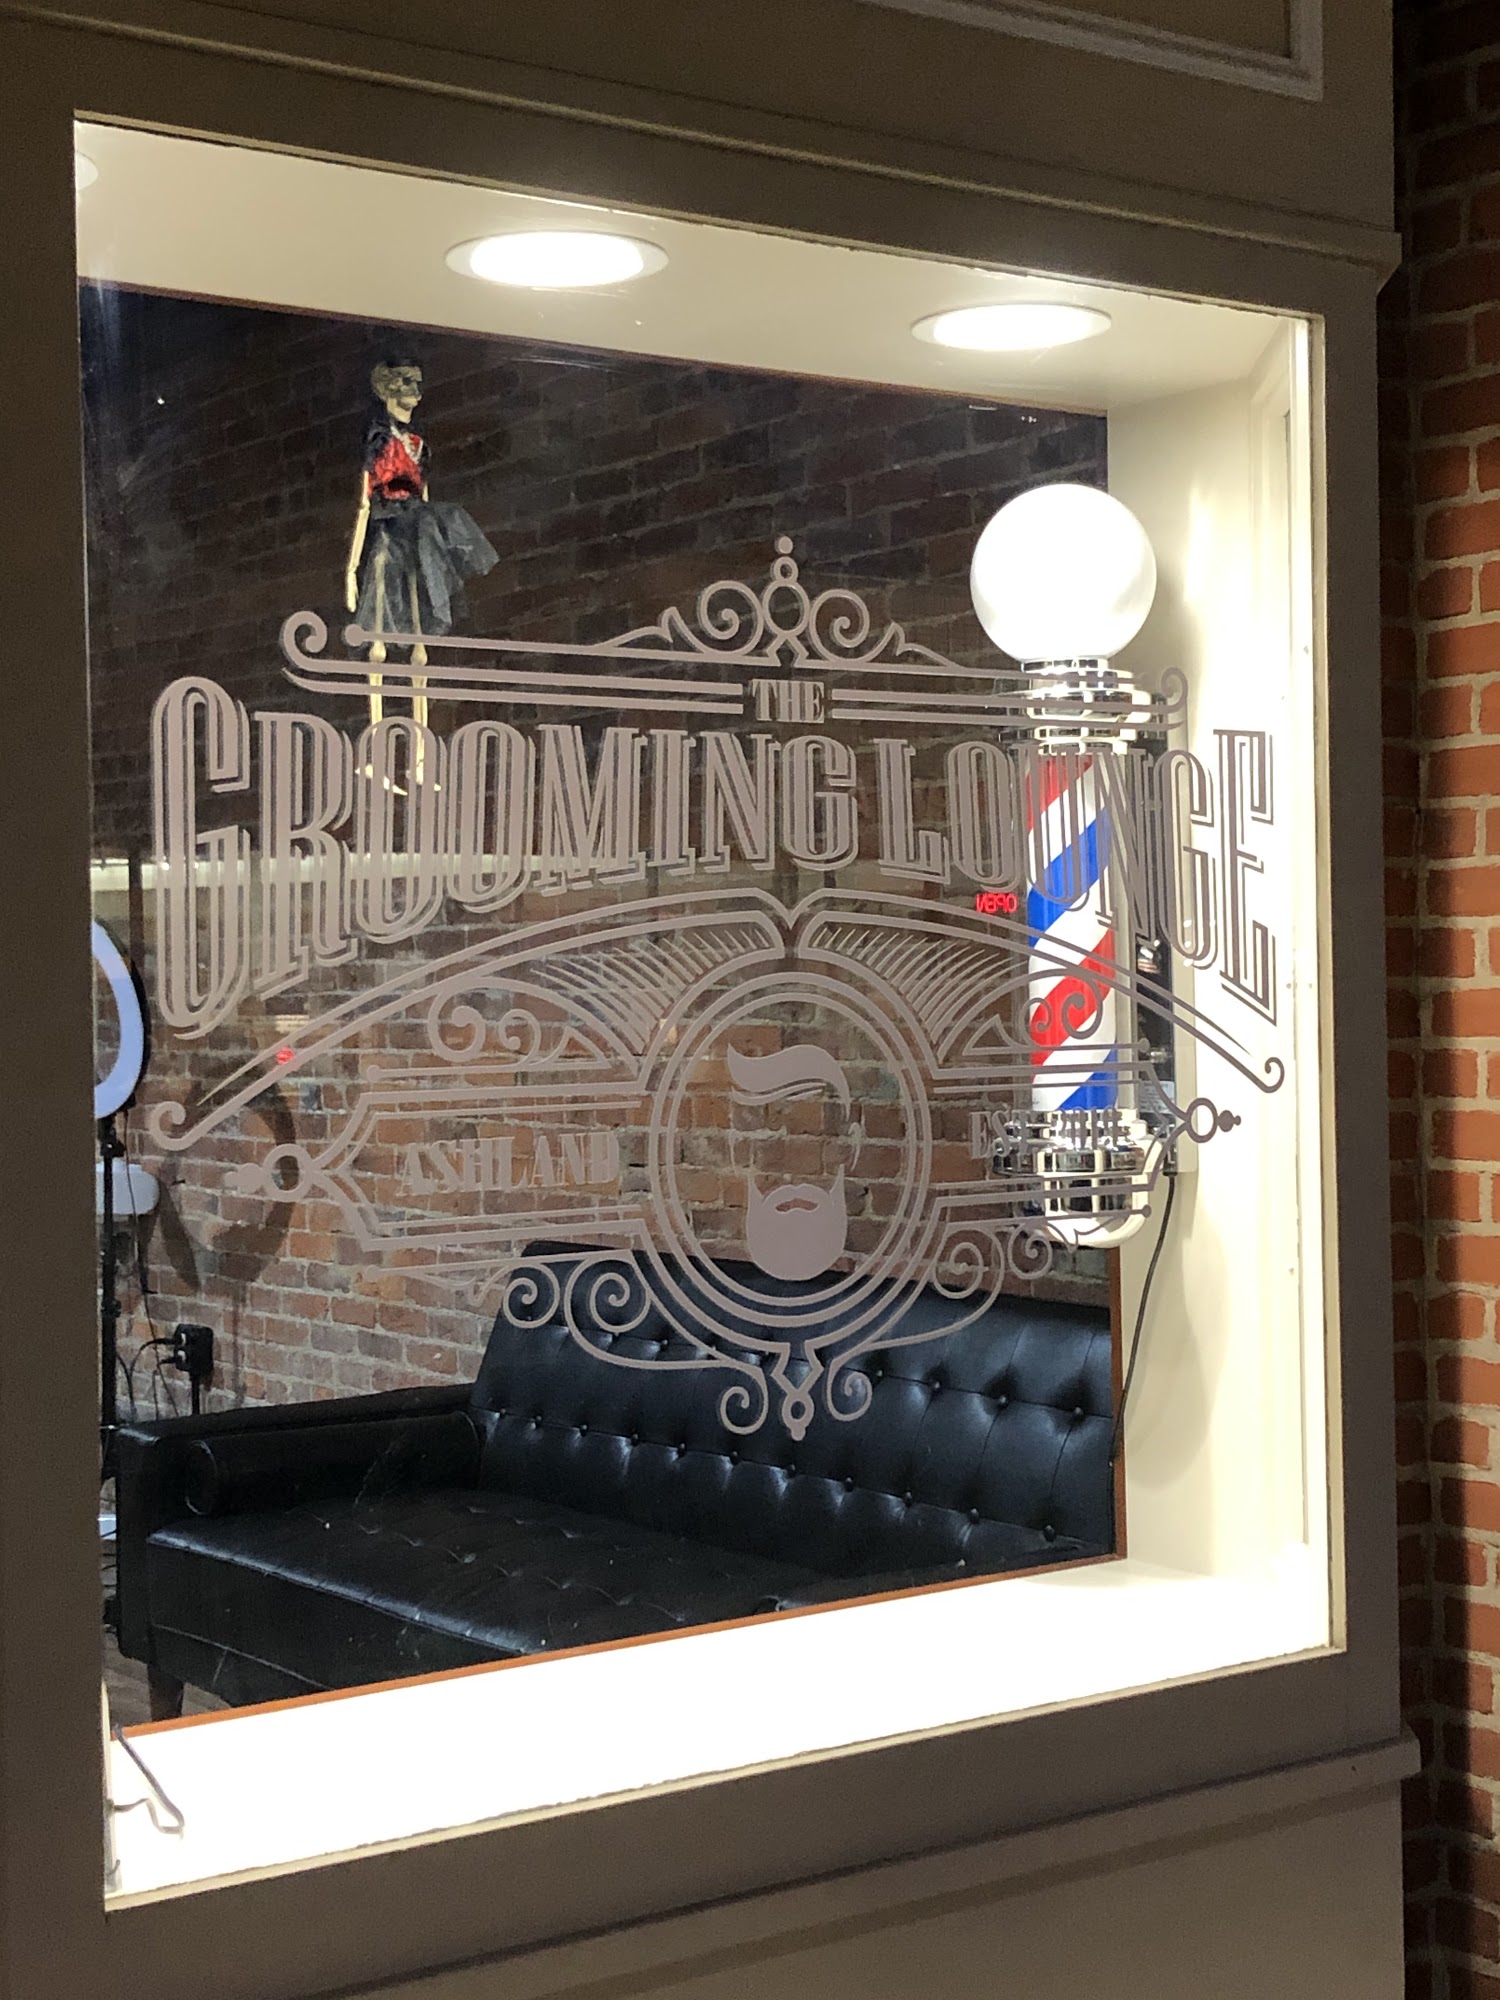 The Grooming lounge